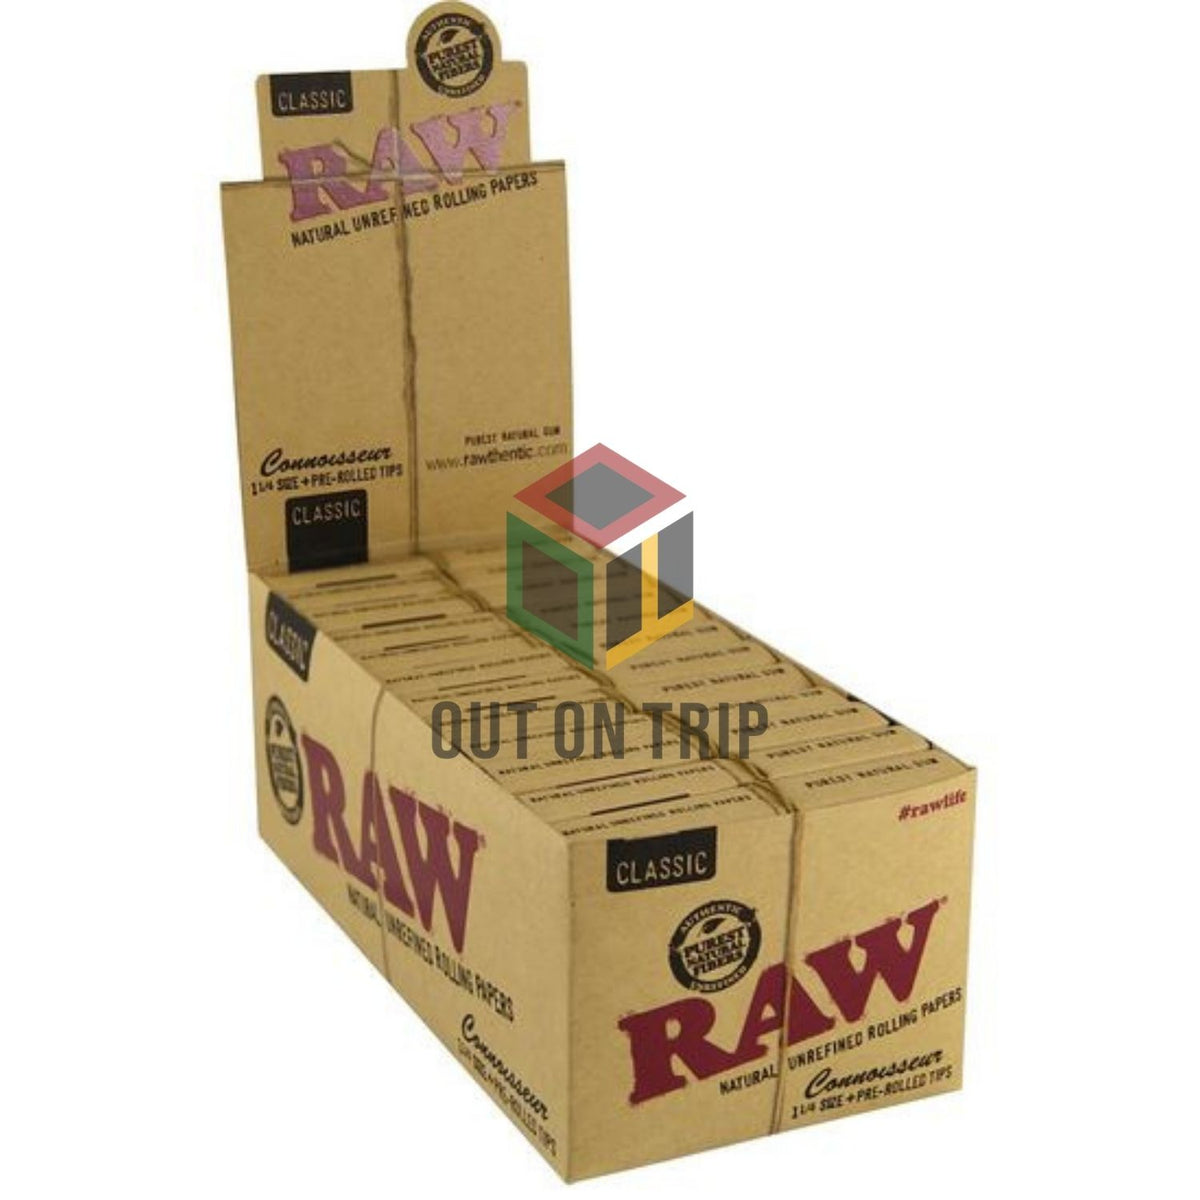 RAW Classic Connoisseur 1 1/4 Rolling Paper w/ Pre-Rolled Tips - 24 Co –  True Distributors